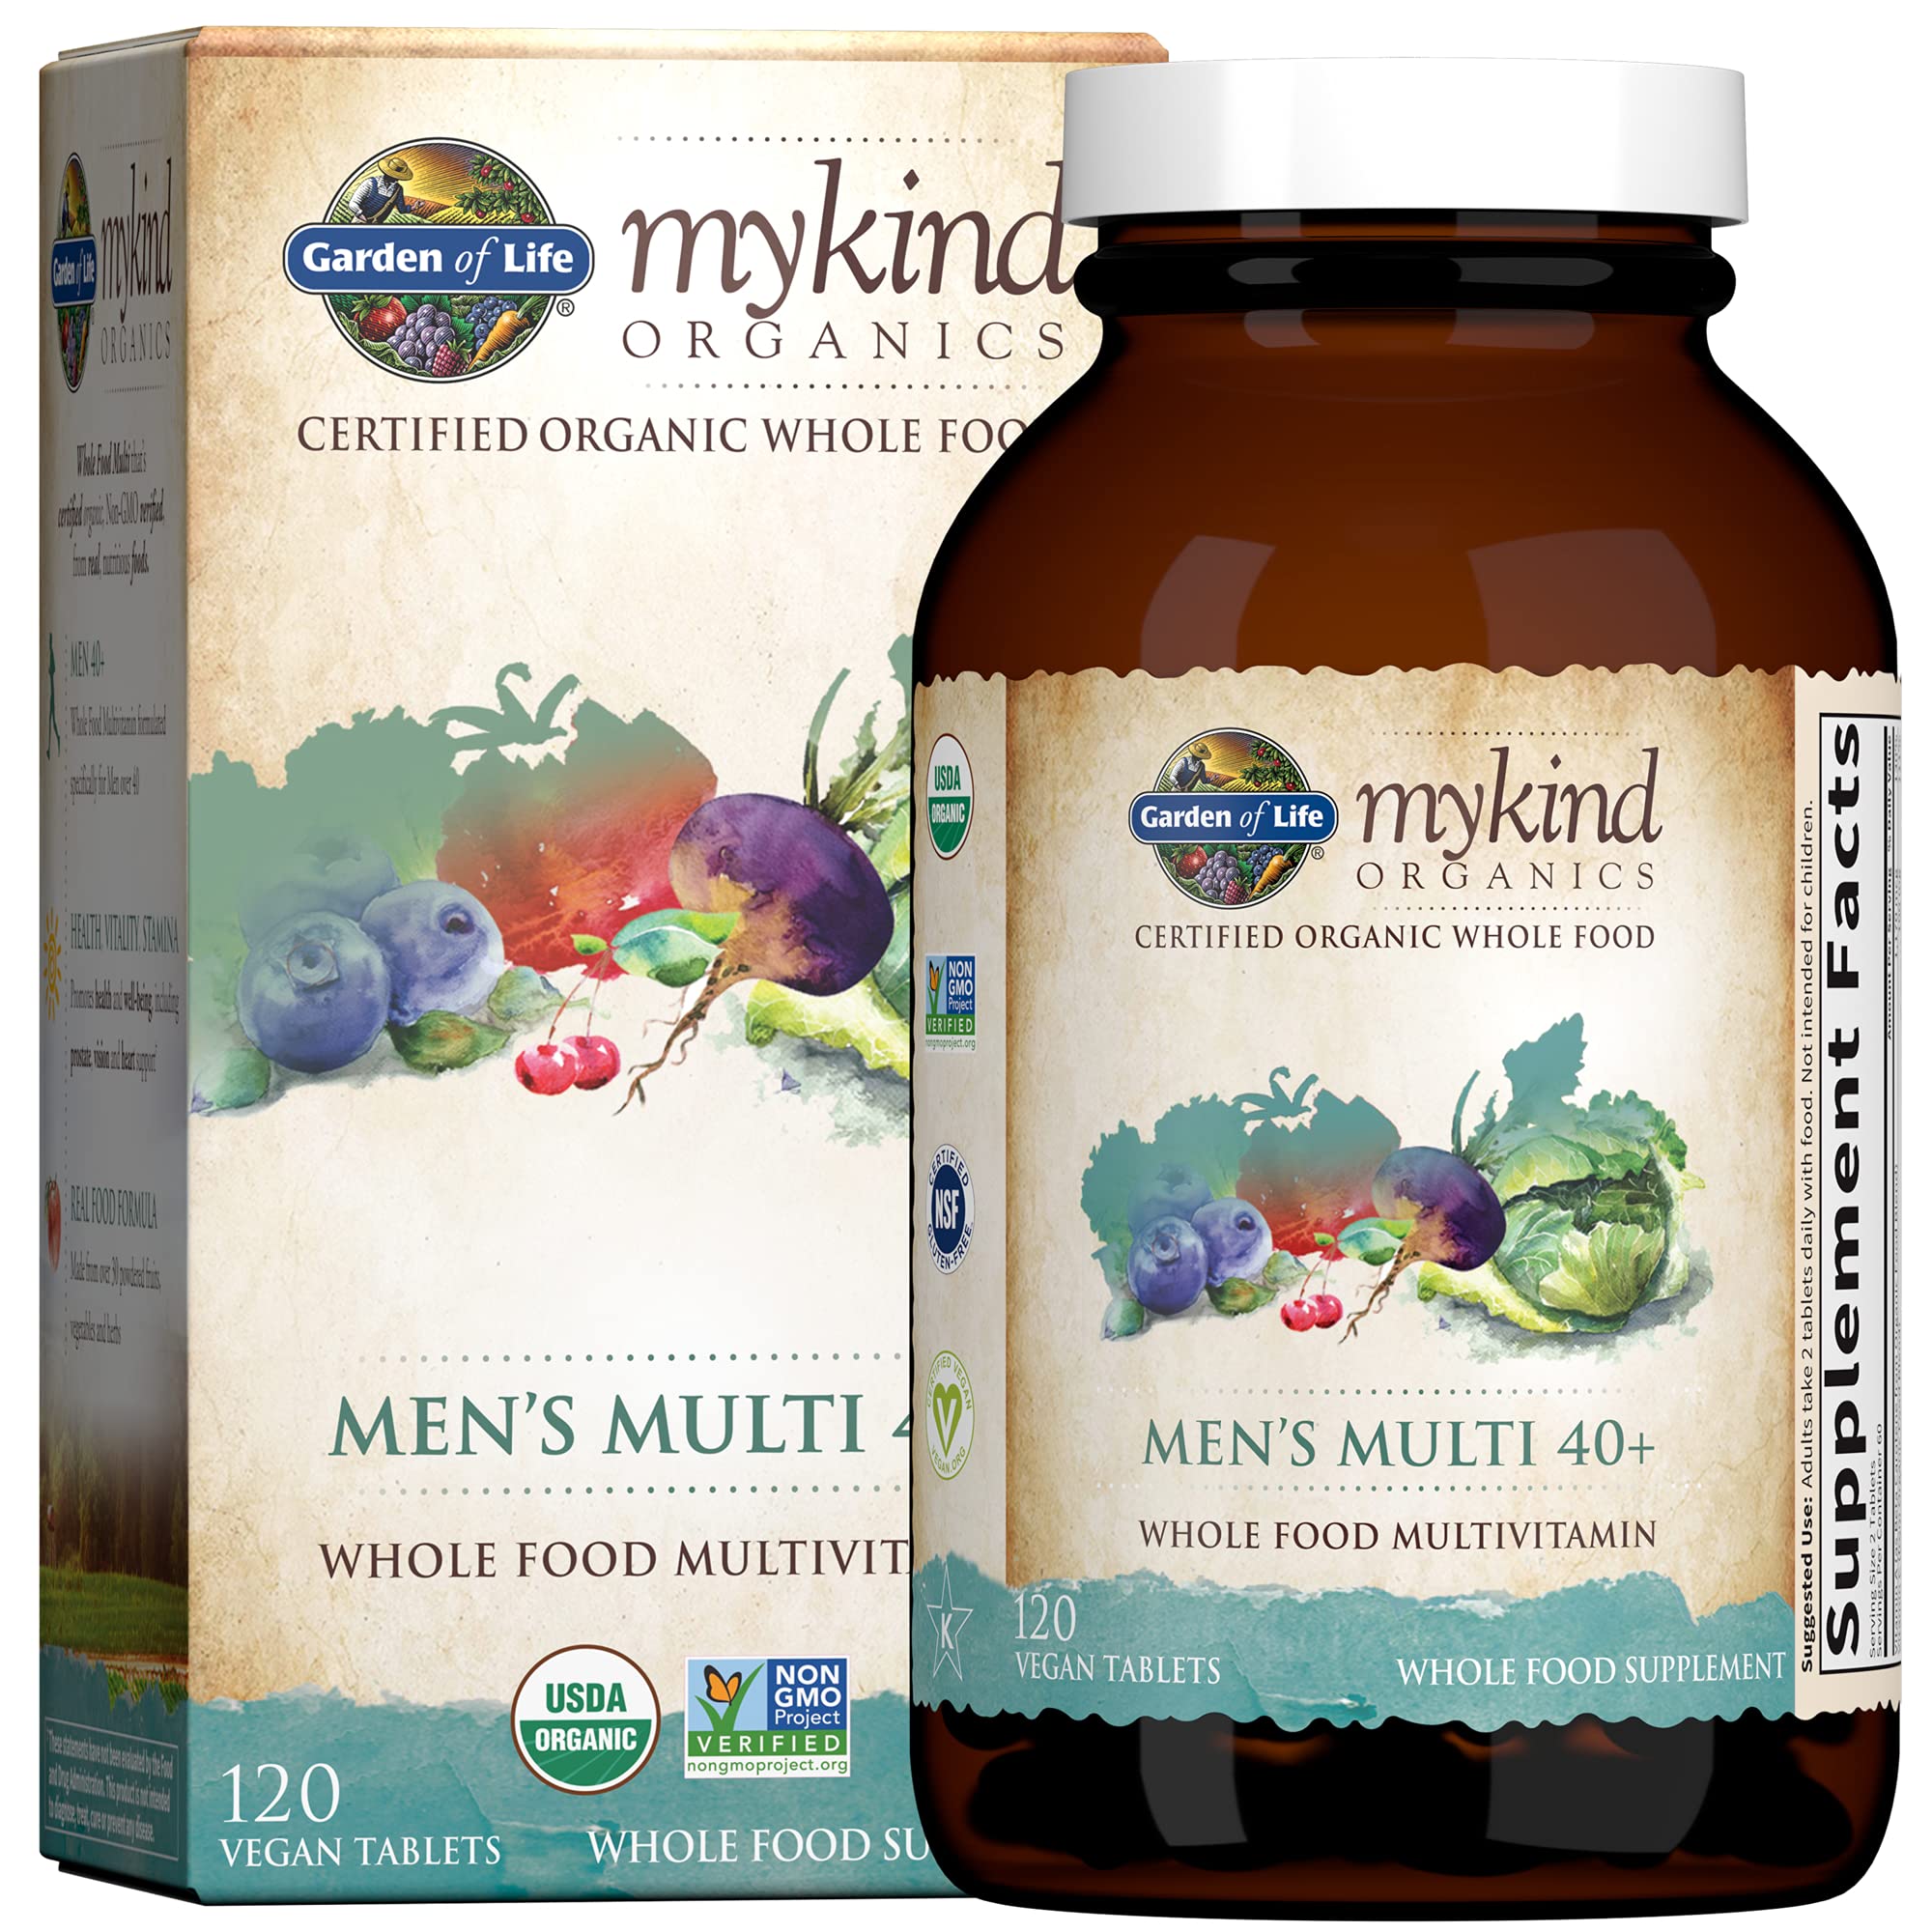 Garden of Life mykind Organics Whole Food Multivitamin for Men 40+ 120 Tablets, Vegan Mens Multi for Health & Well-Being Certified Organic Whole Food Vitamins & Minerals for Men Over 40 Mens Vitamins